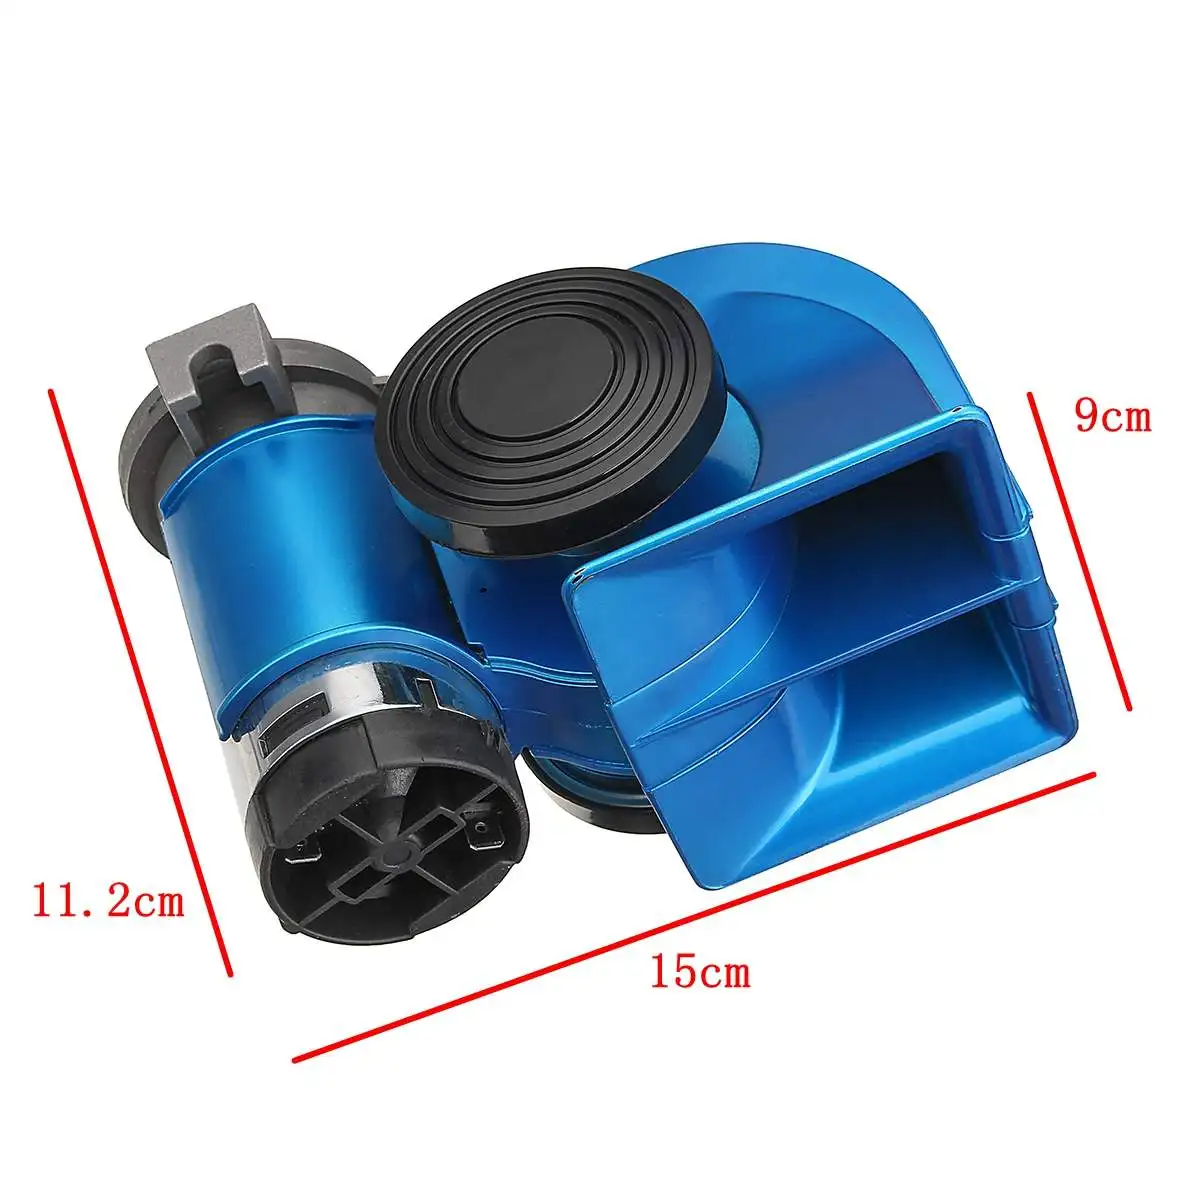 

12V 139DB Loud waterproof Electronic Snail Ultra Compact Dual Air Horn Fit for car vehicle motorcycle yacht boat SUV bike buses